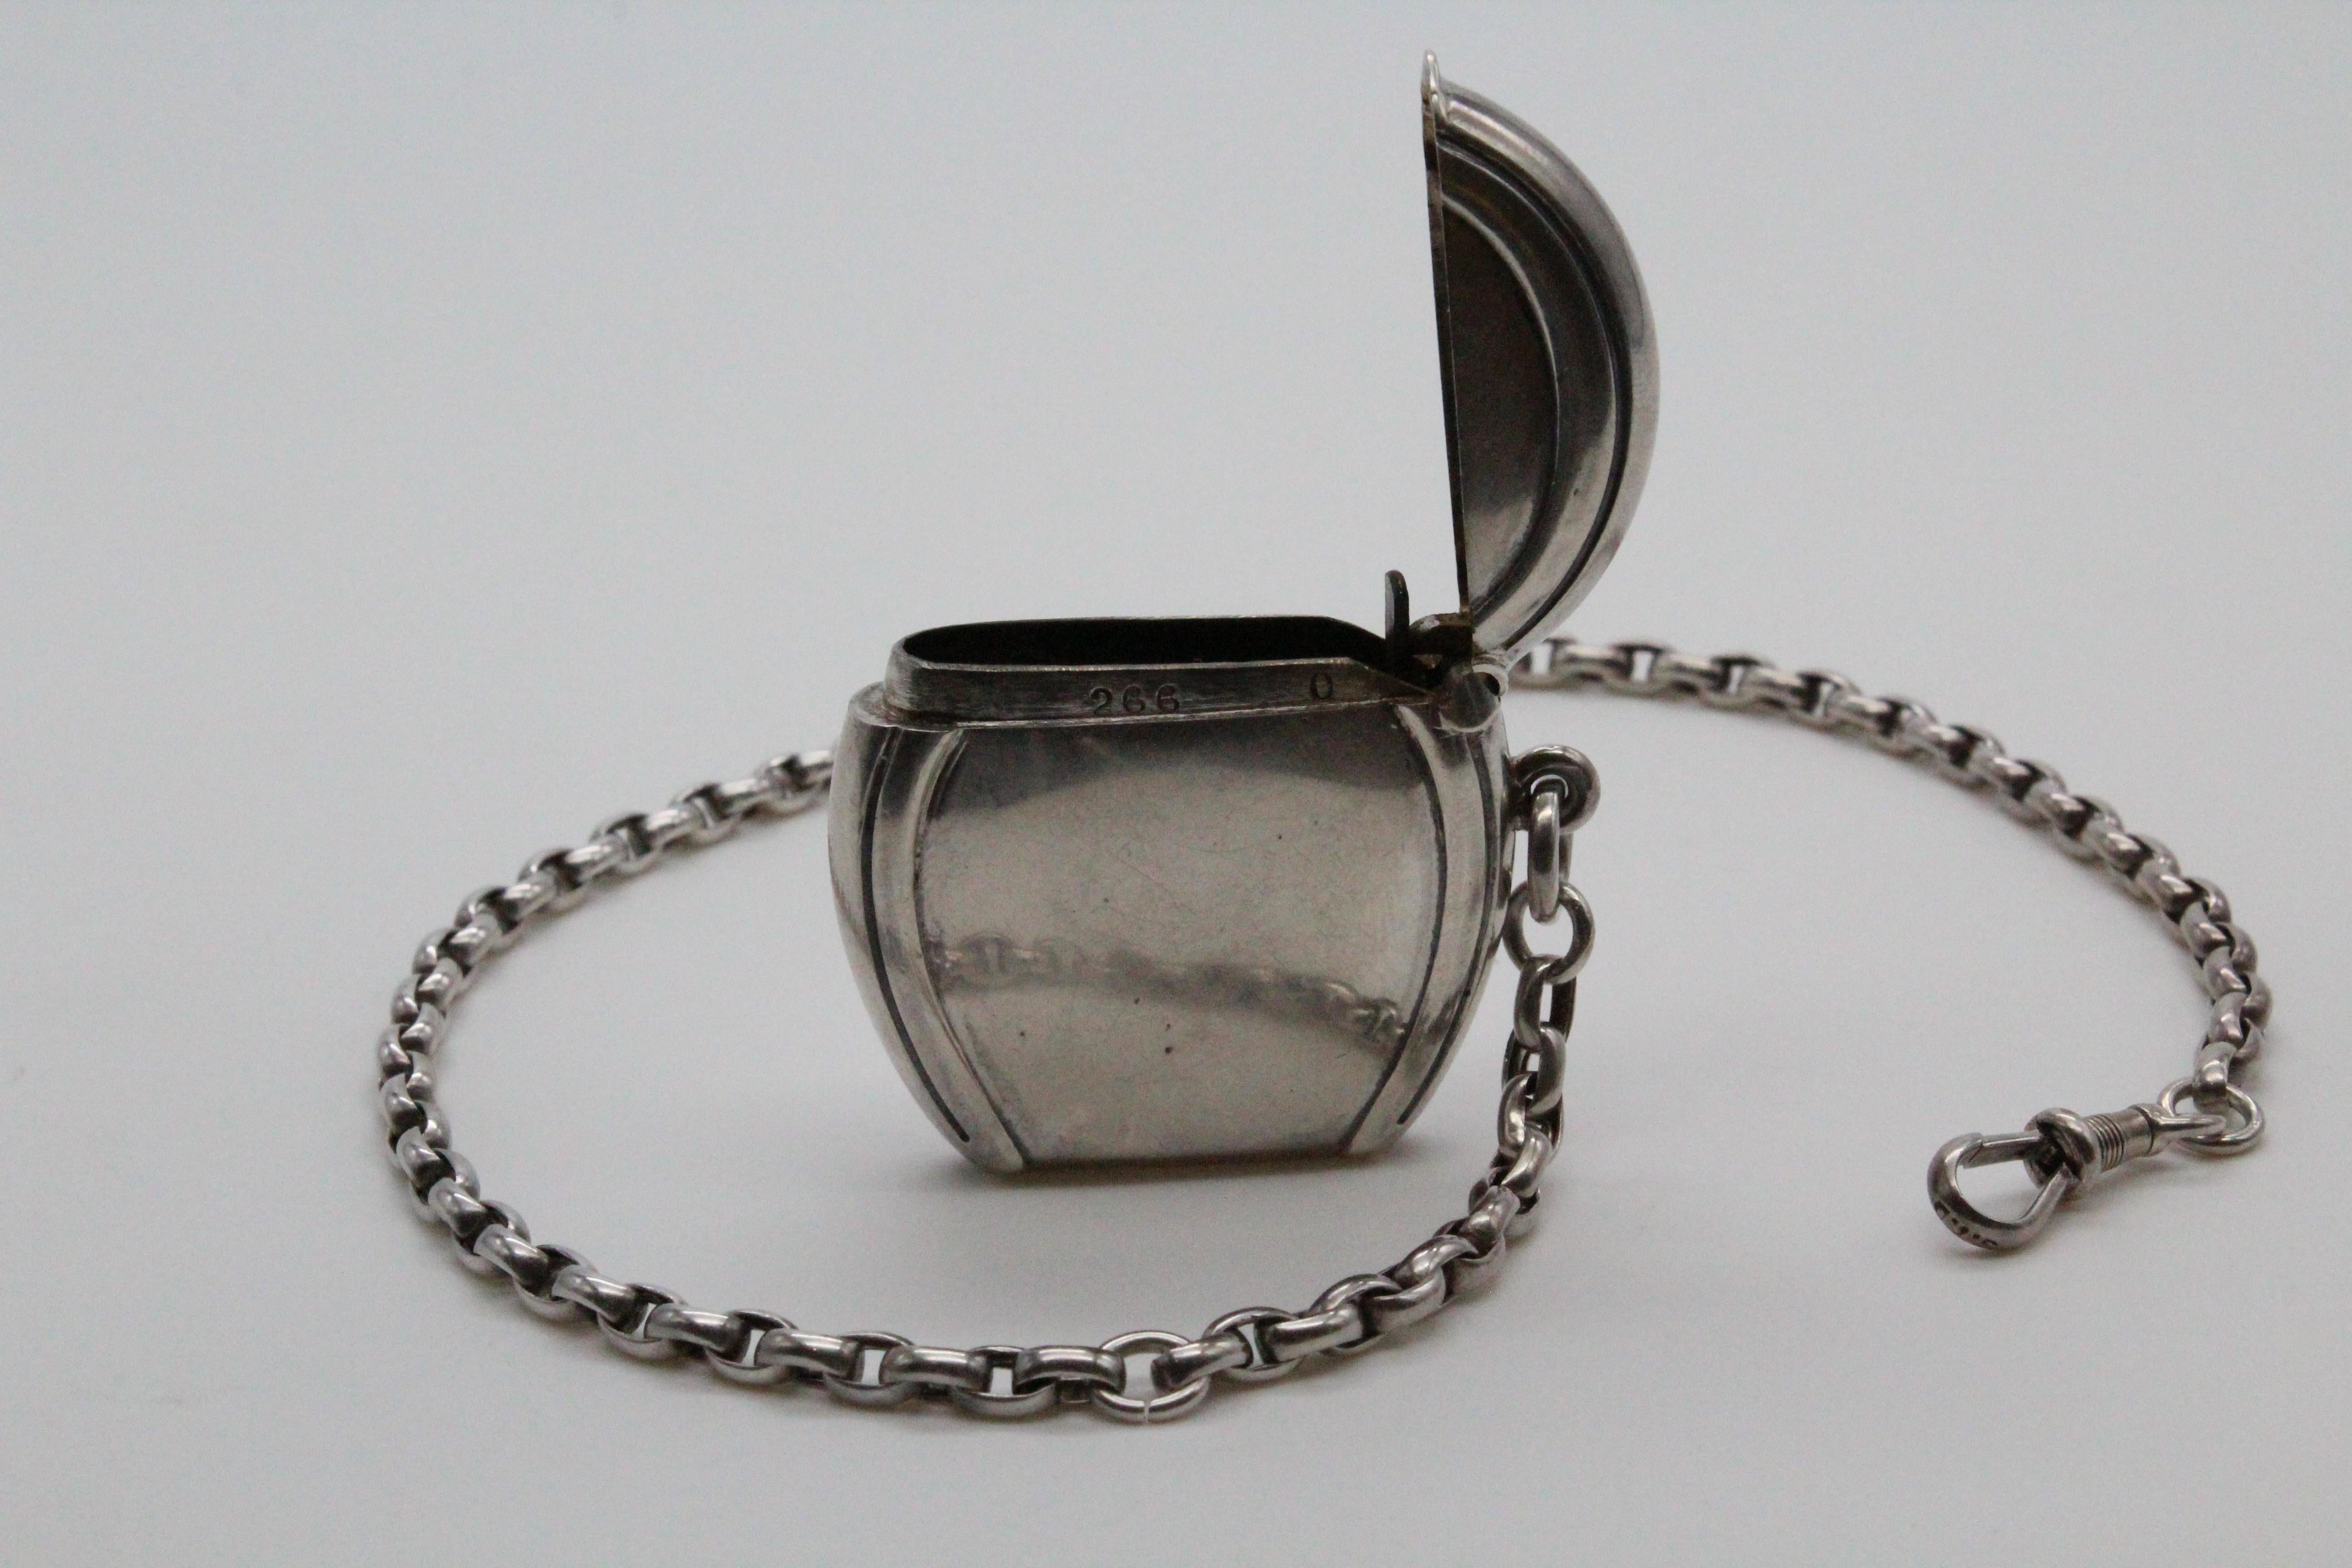 Match holder sterling silver, USA marks with silver chain.
The chain is 38cm long.